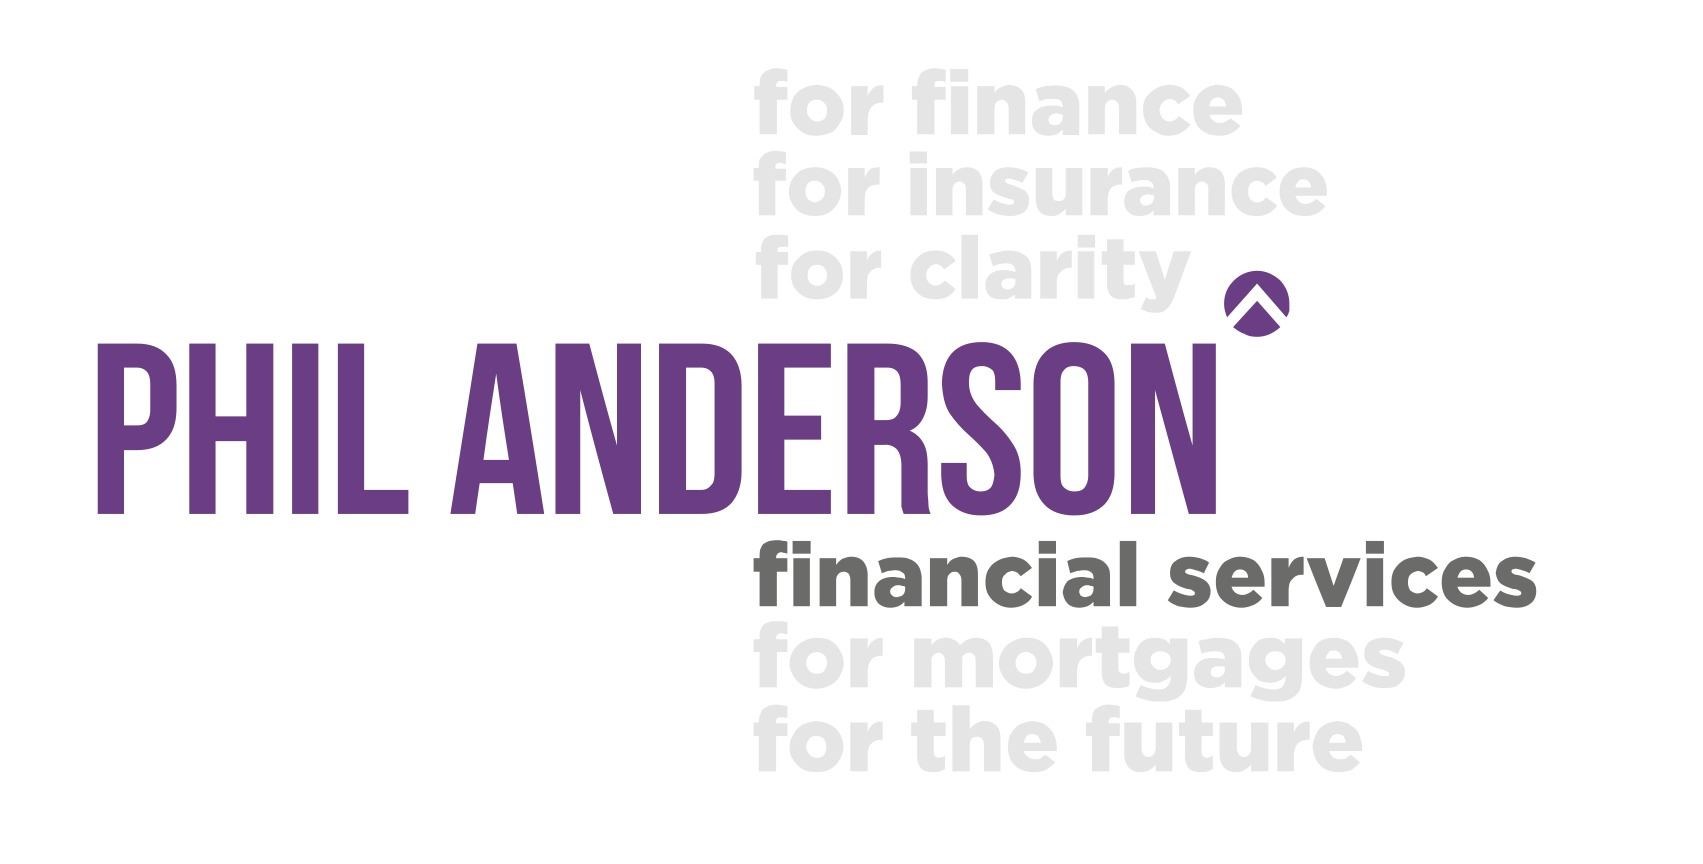 Phil Anderson Financial Services.